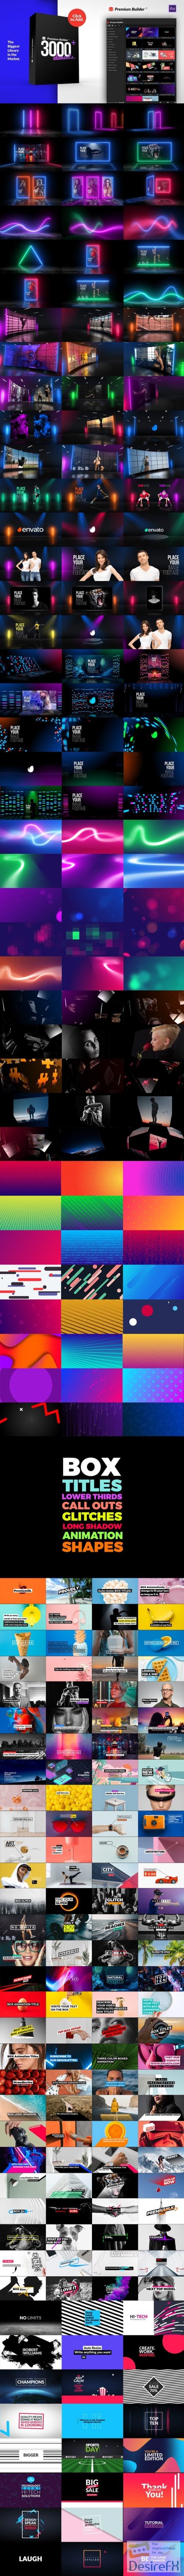 Videohive PremiumBuilder Motion Pack - 24019319 - V2 - After Effects Template